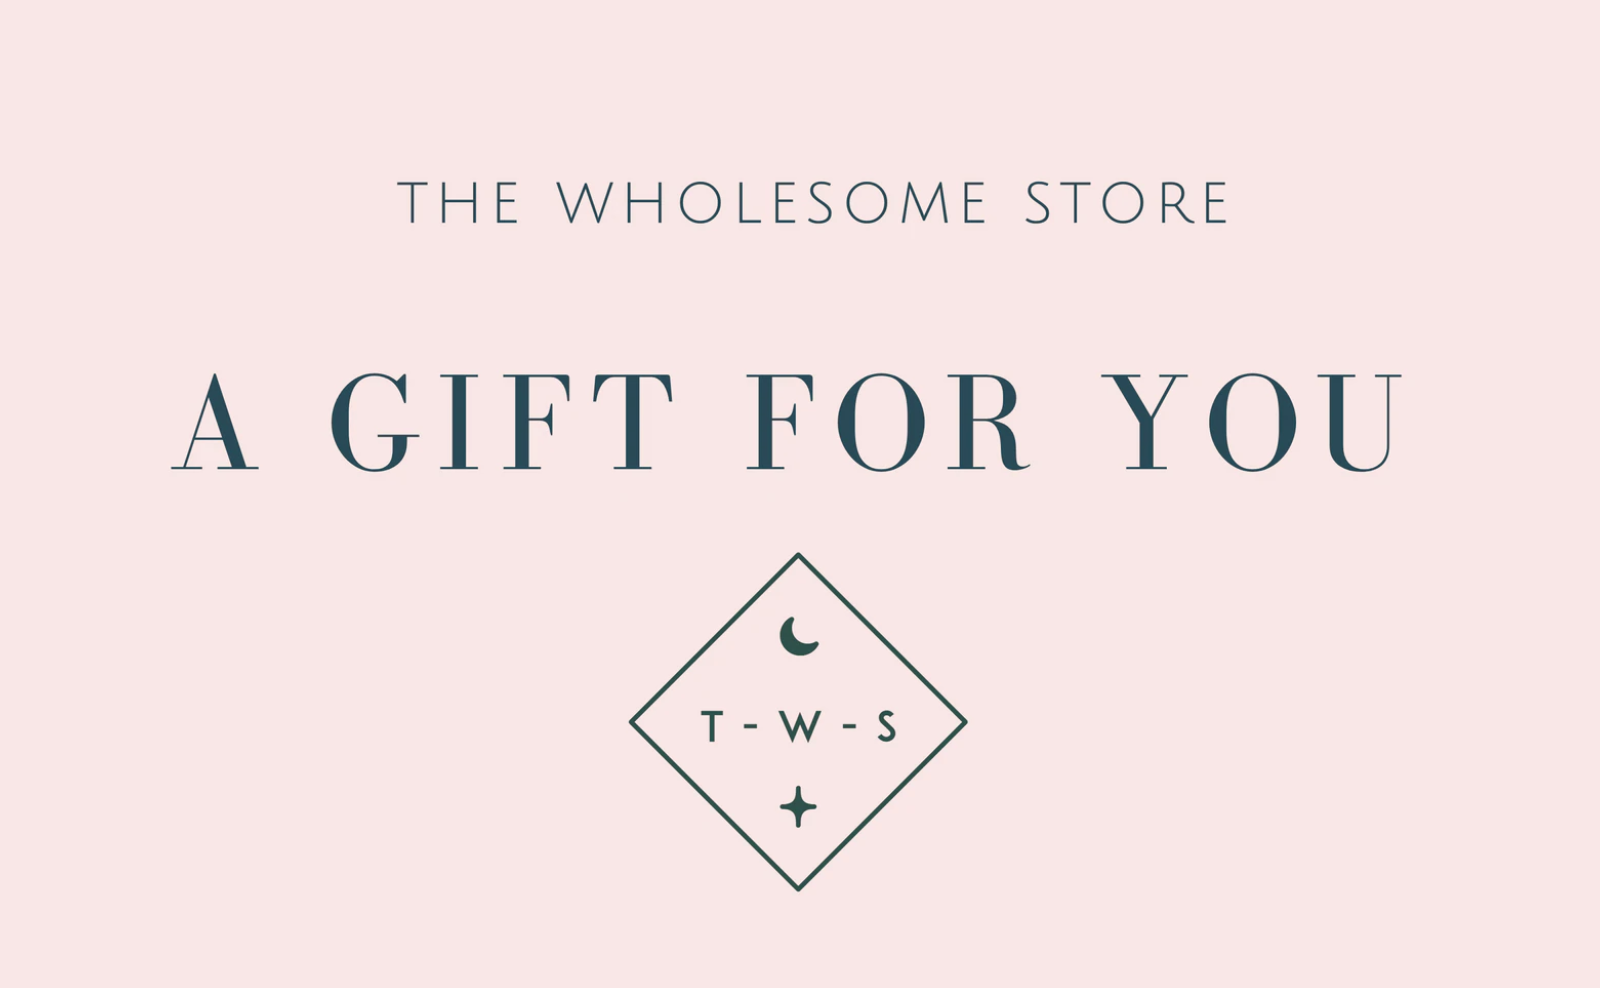 Wholesome Store (Gift Card)